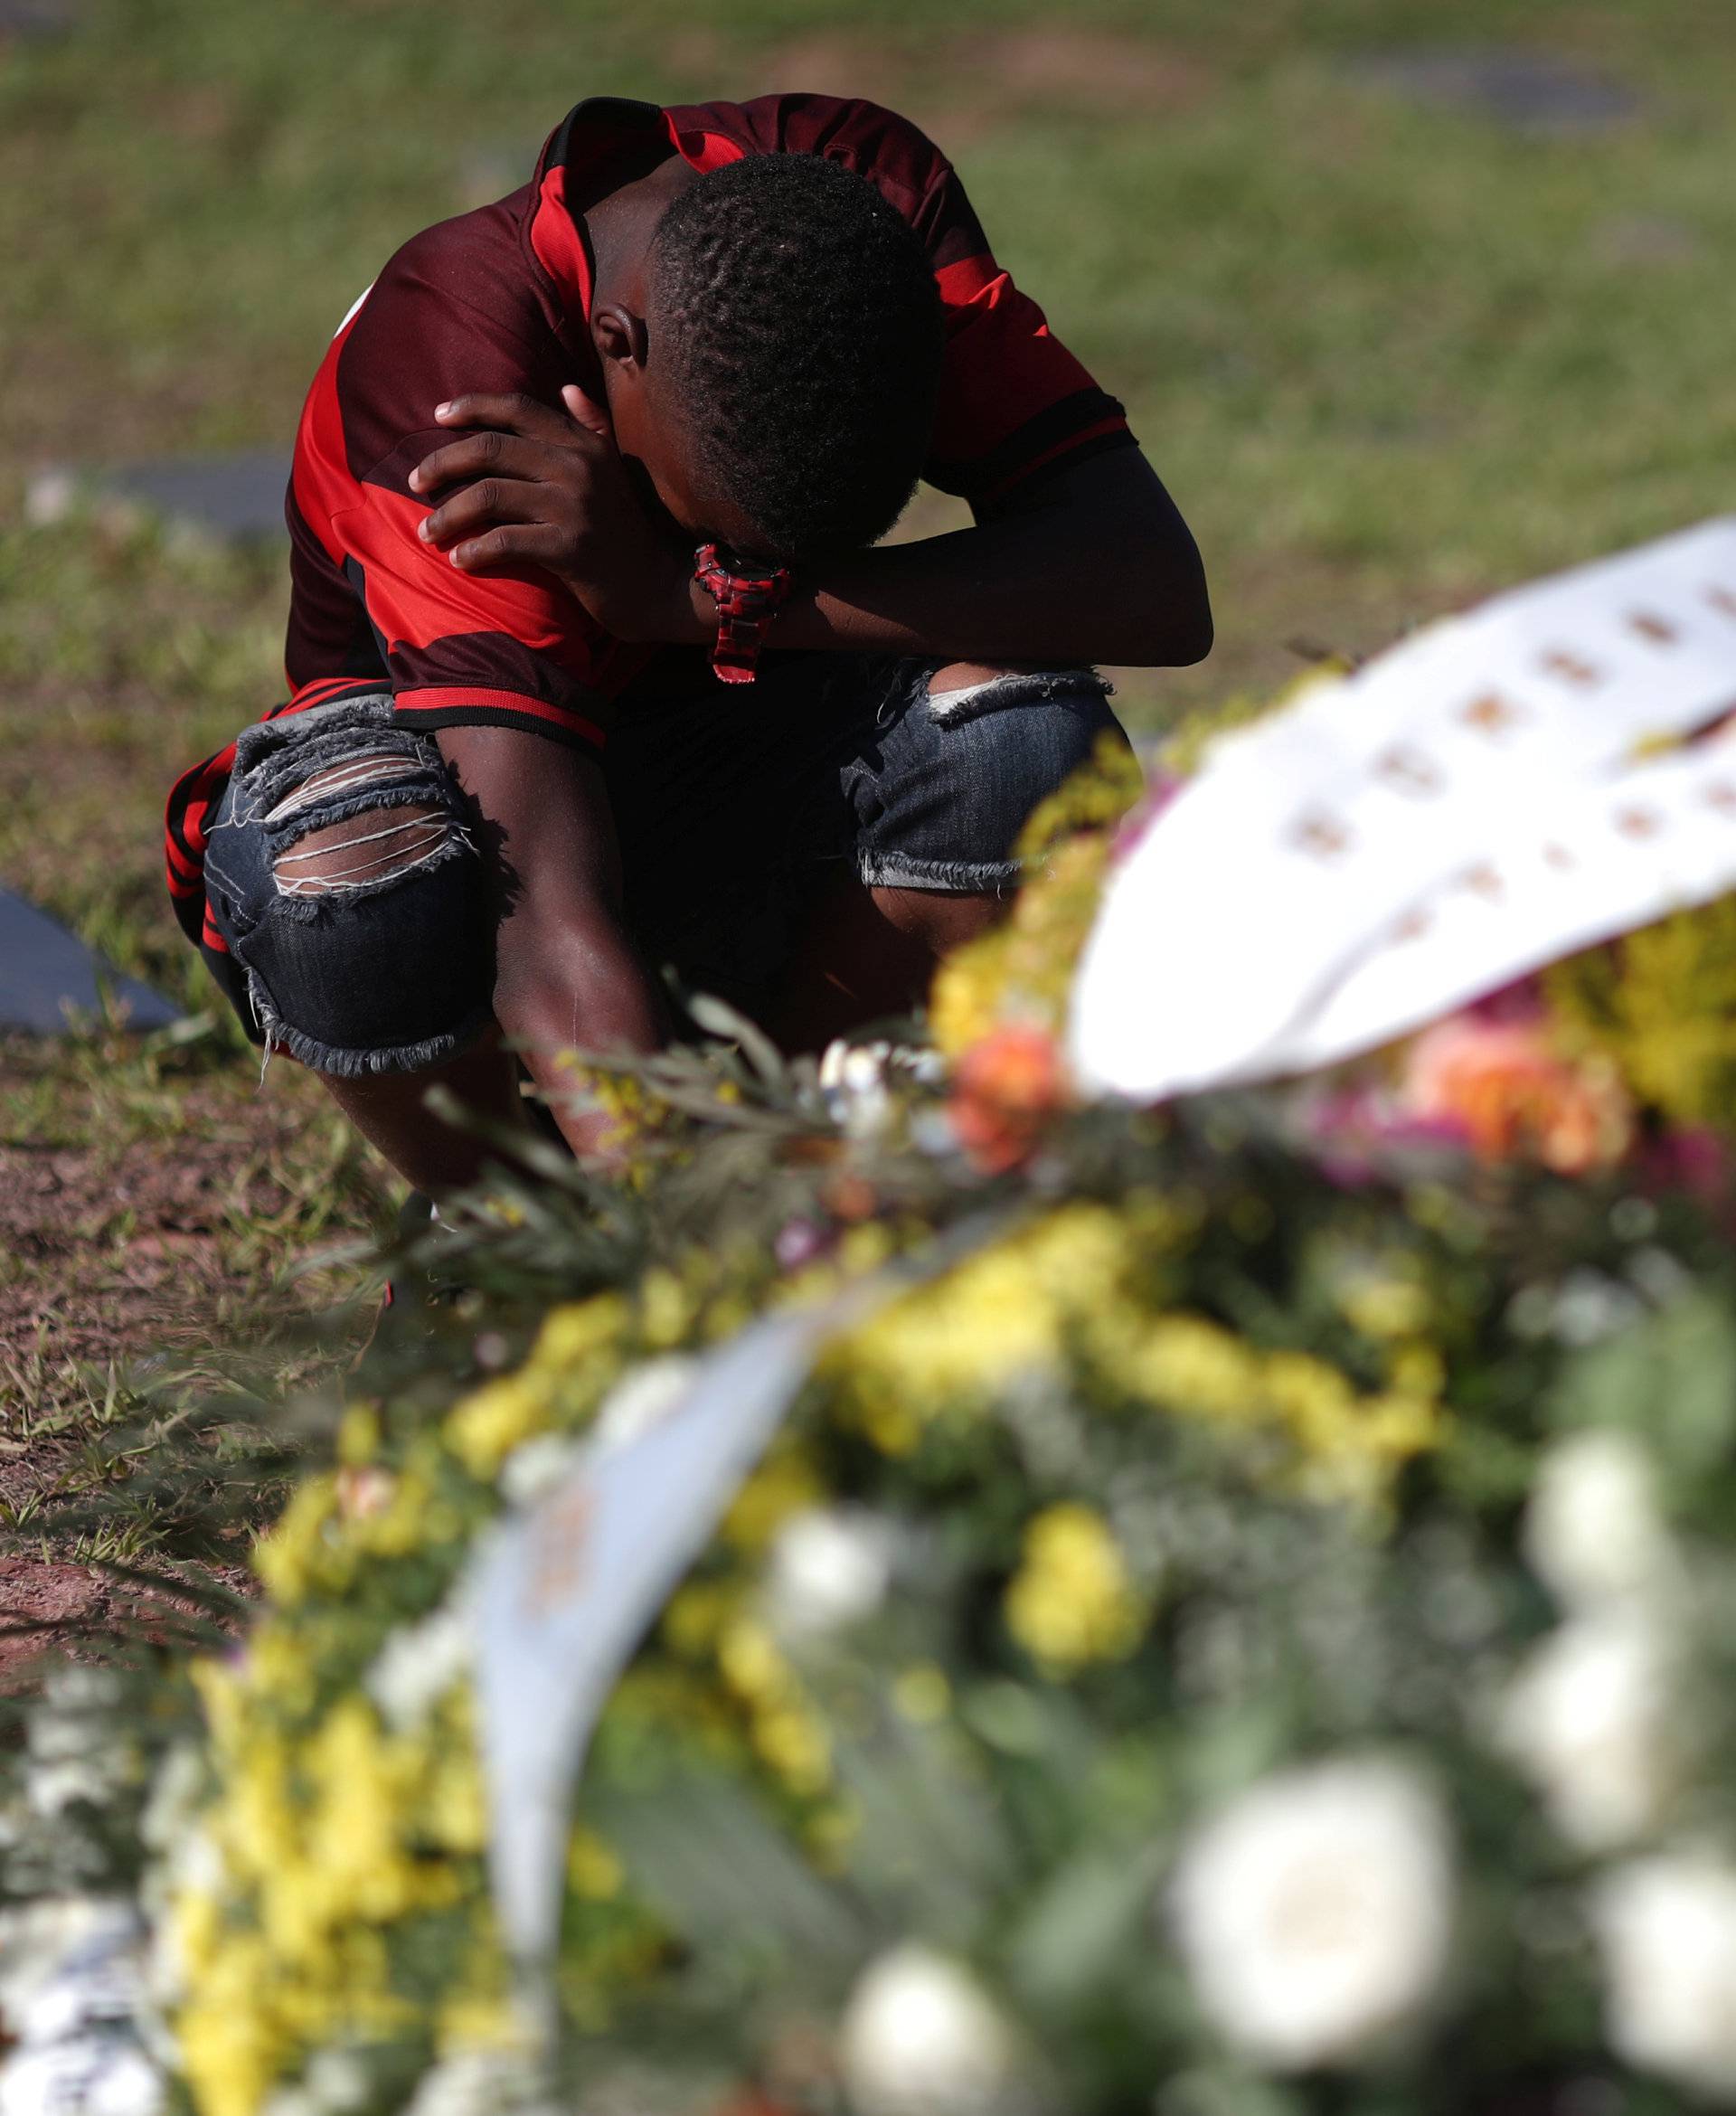 A friend of soccer player Vinicius de Barros Silva Freitas reacts during his burial, after a deadly fire at Flamengo soccer club's training center, in Volta Redonda